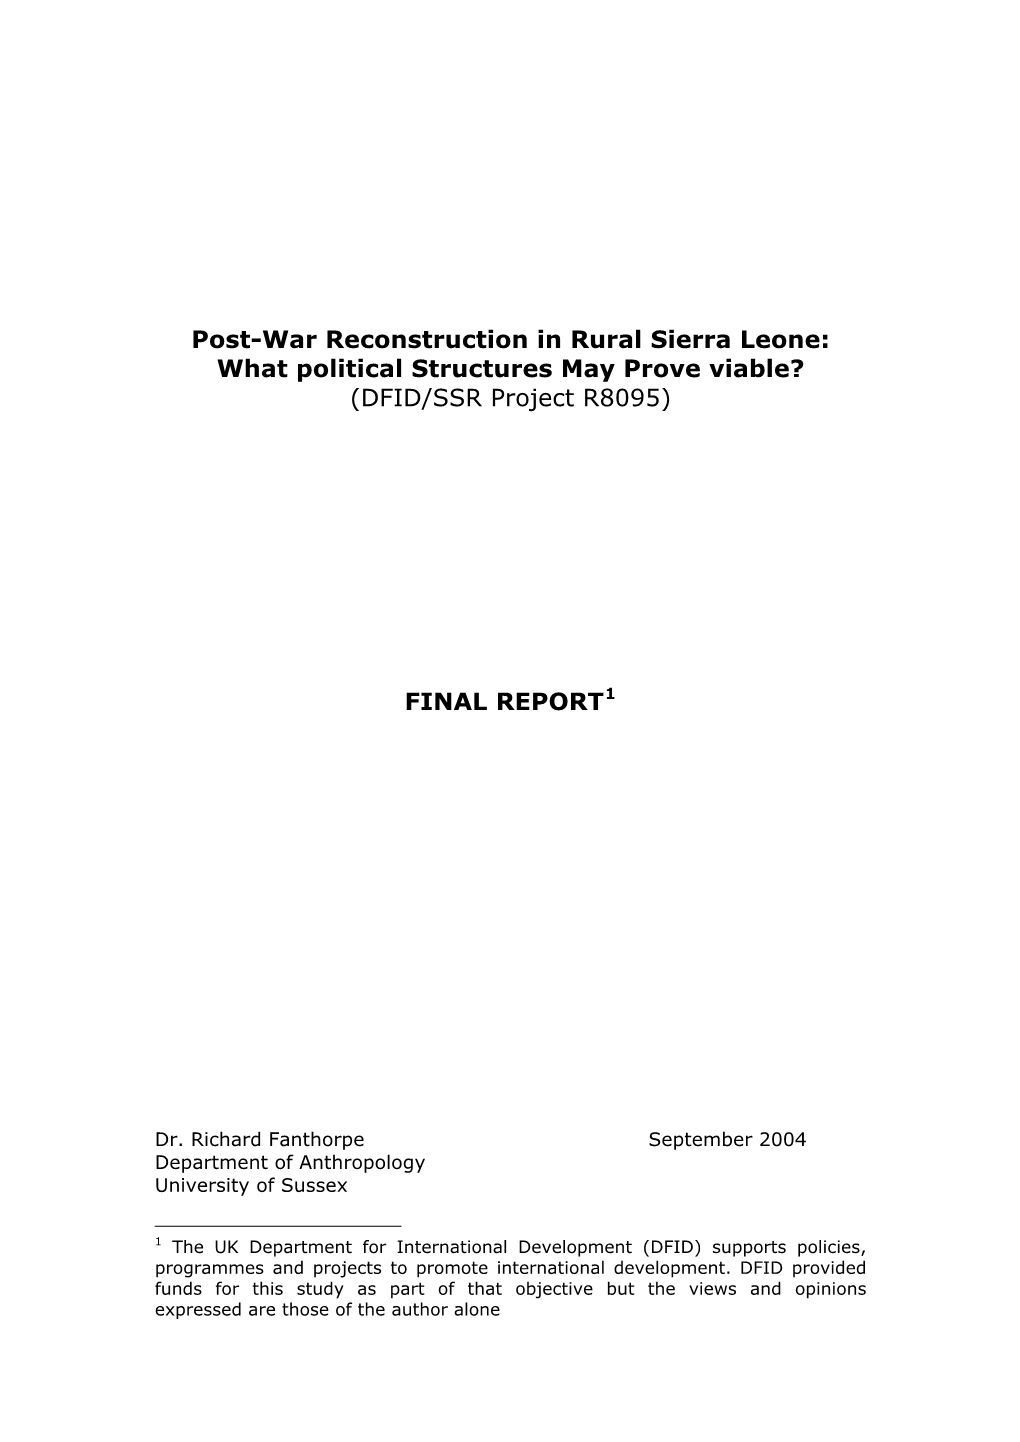 Post-War Reconstruction in Rural Sierra Leone: What Political Structures May Prove Viable? (DFID/SSR Project R8095)